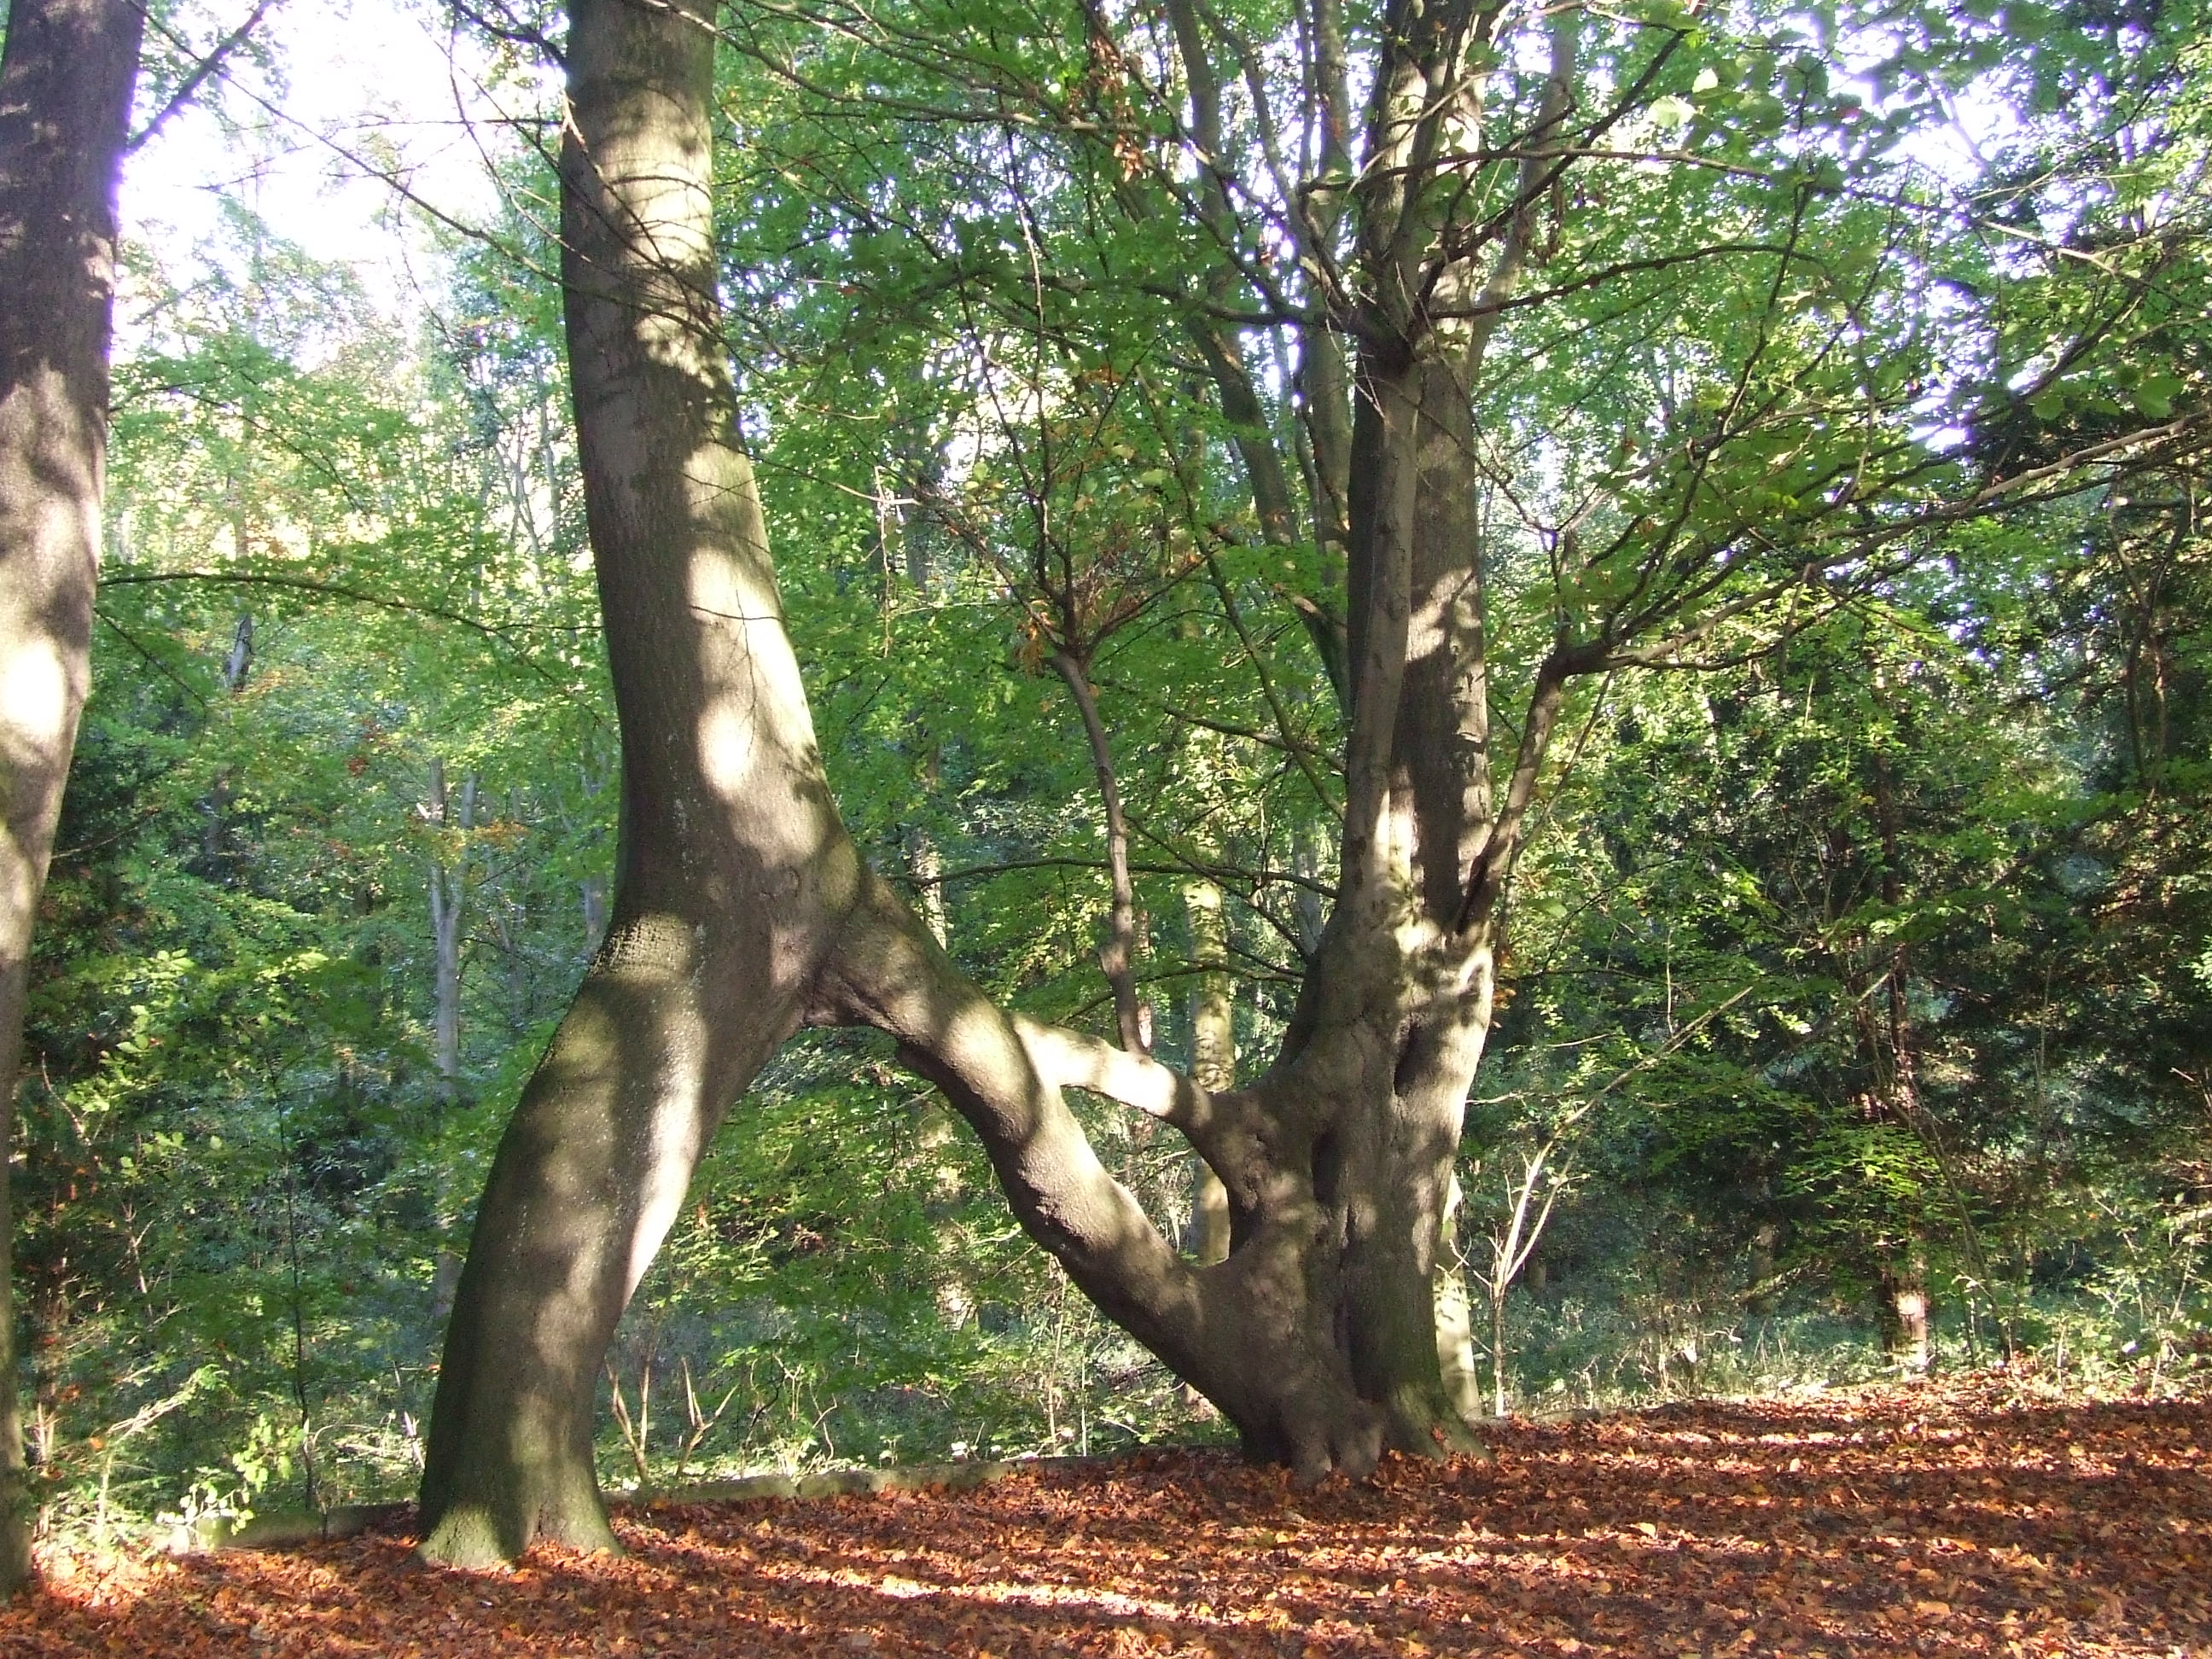 Nellie's tree, the Woodland Trust England's tree of the year 2018